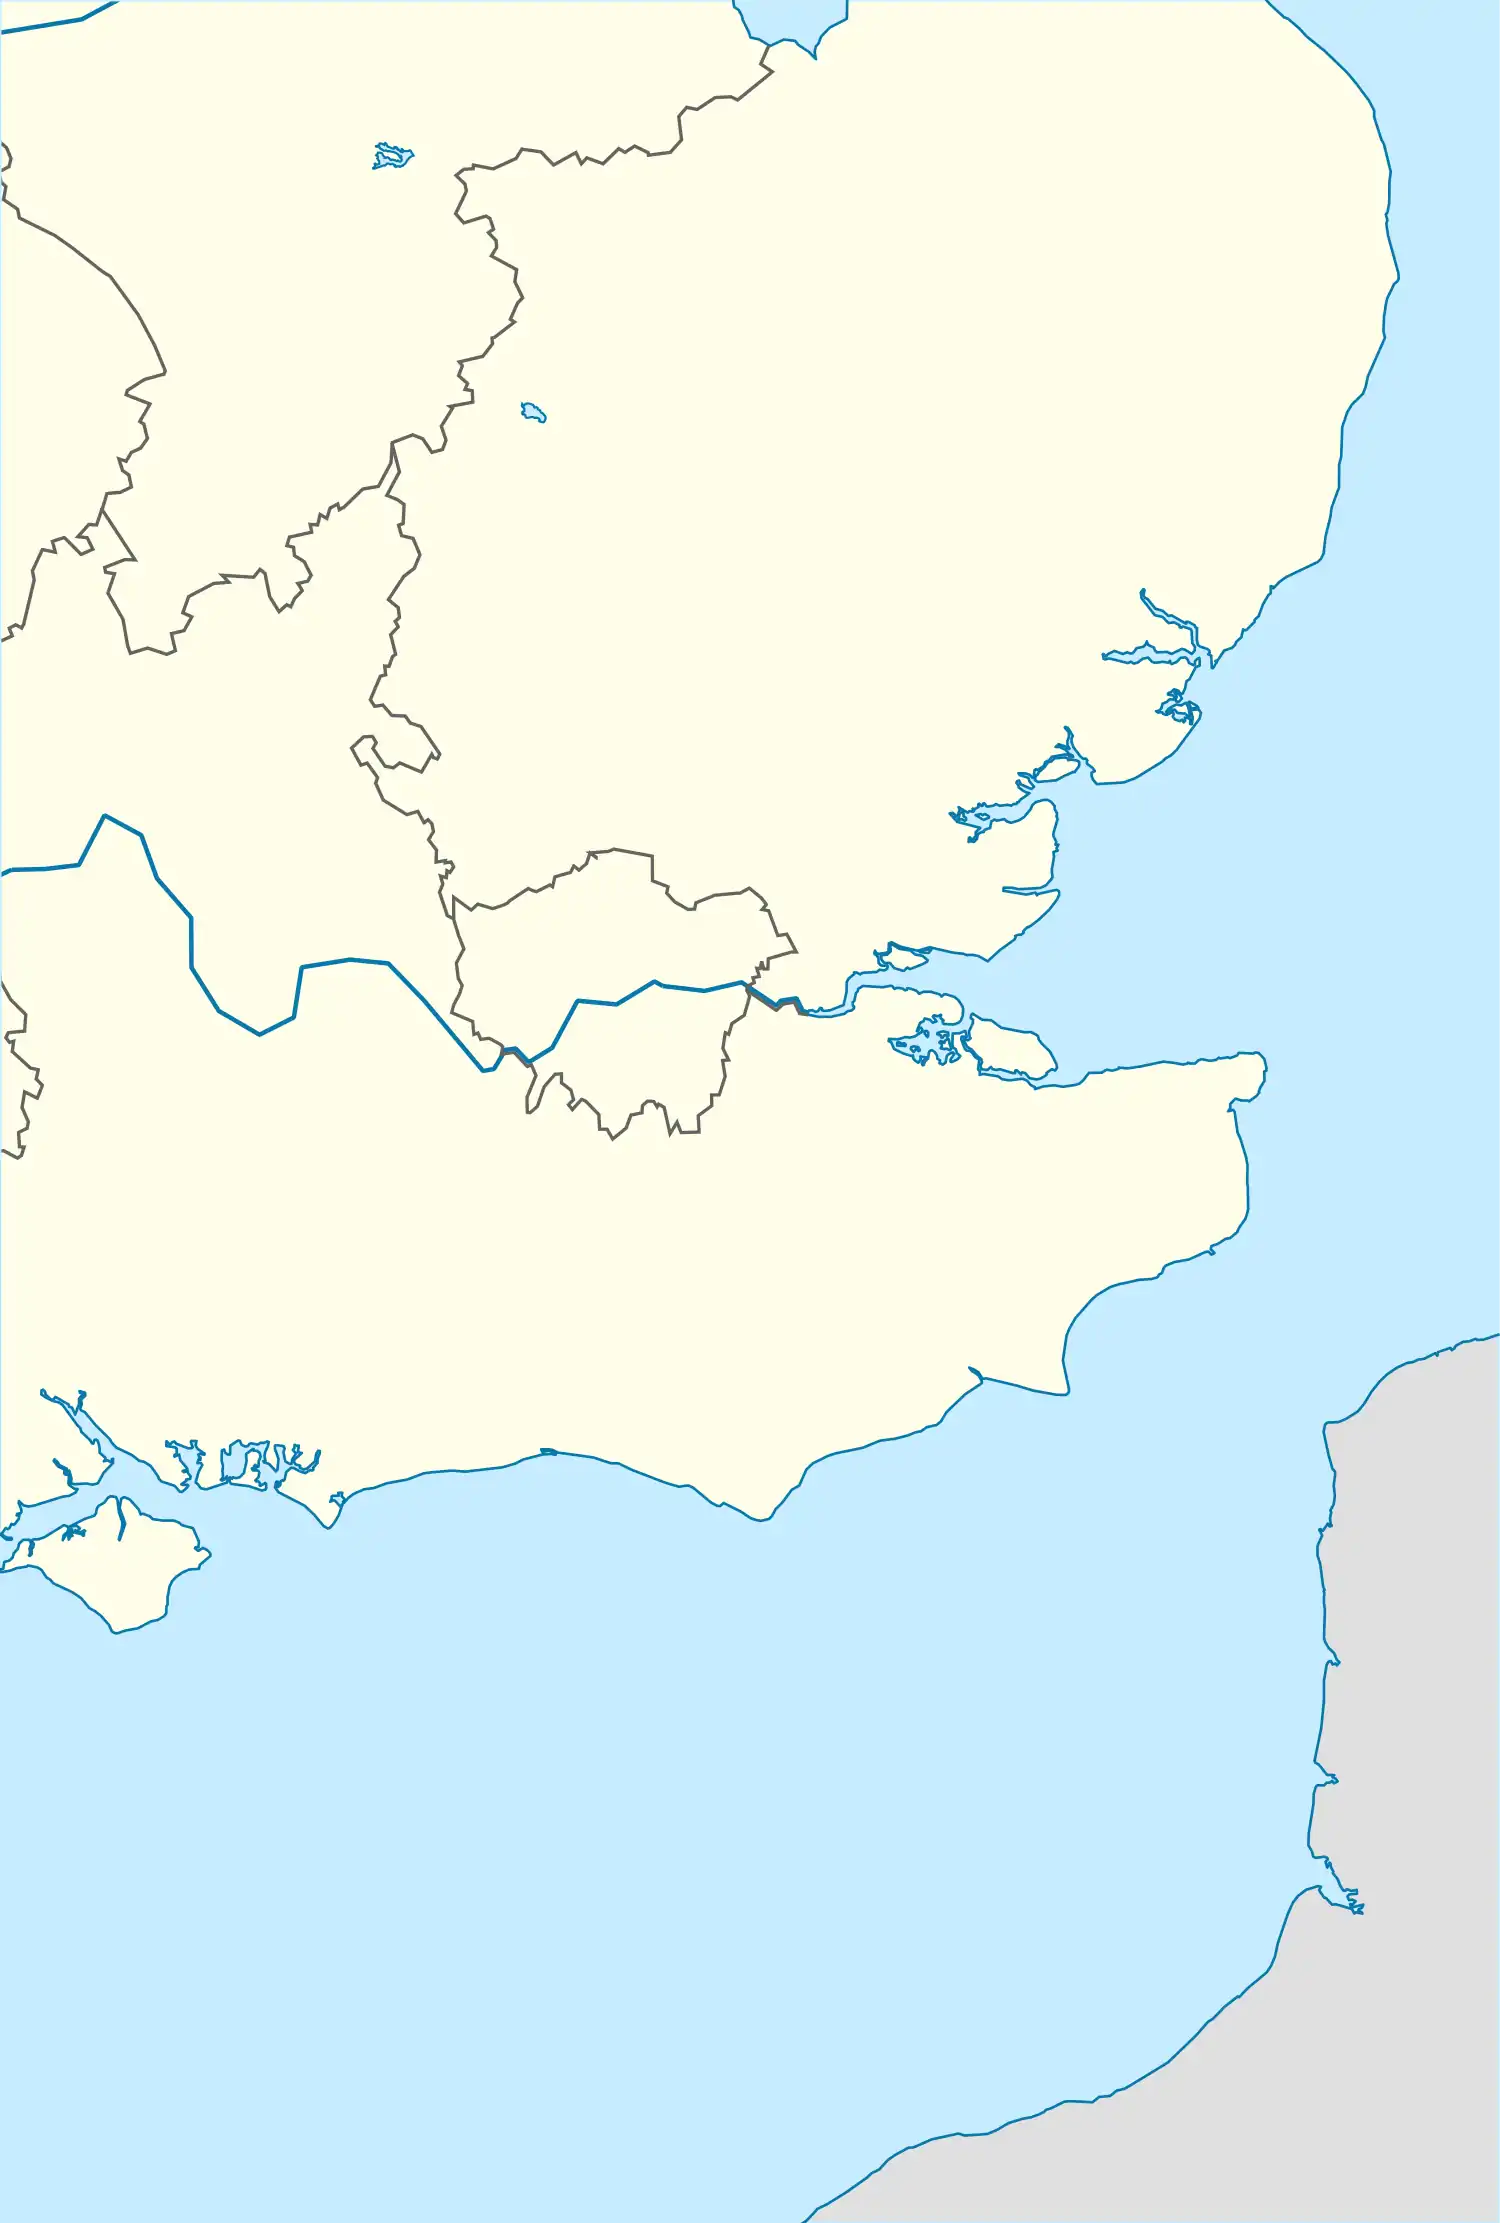 SS Donegal is located in Southeast England